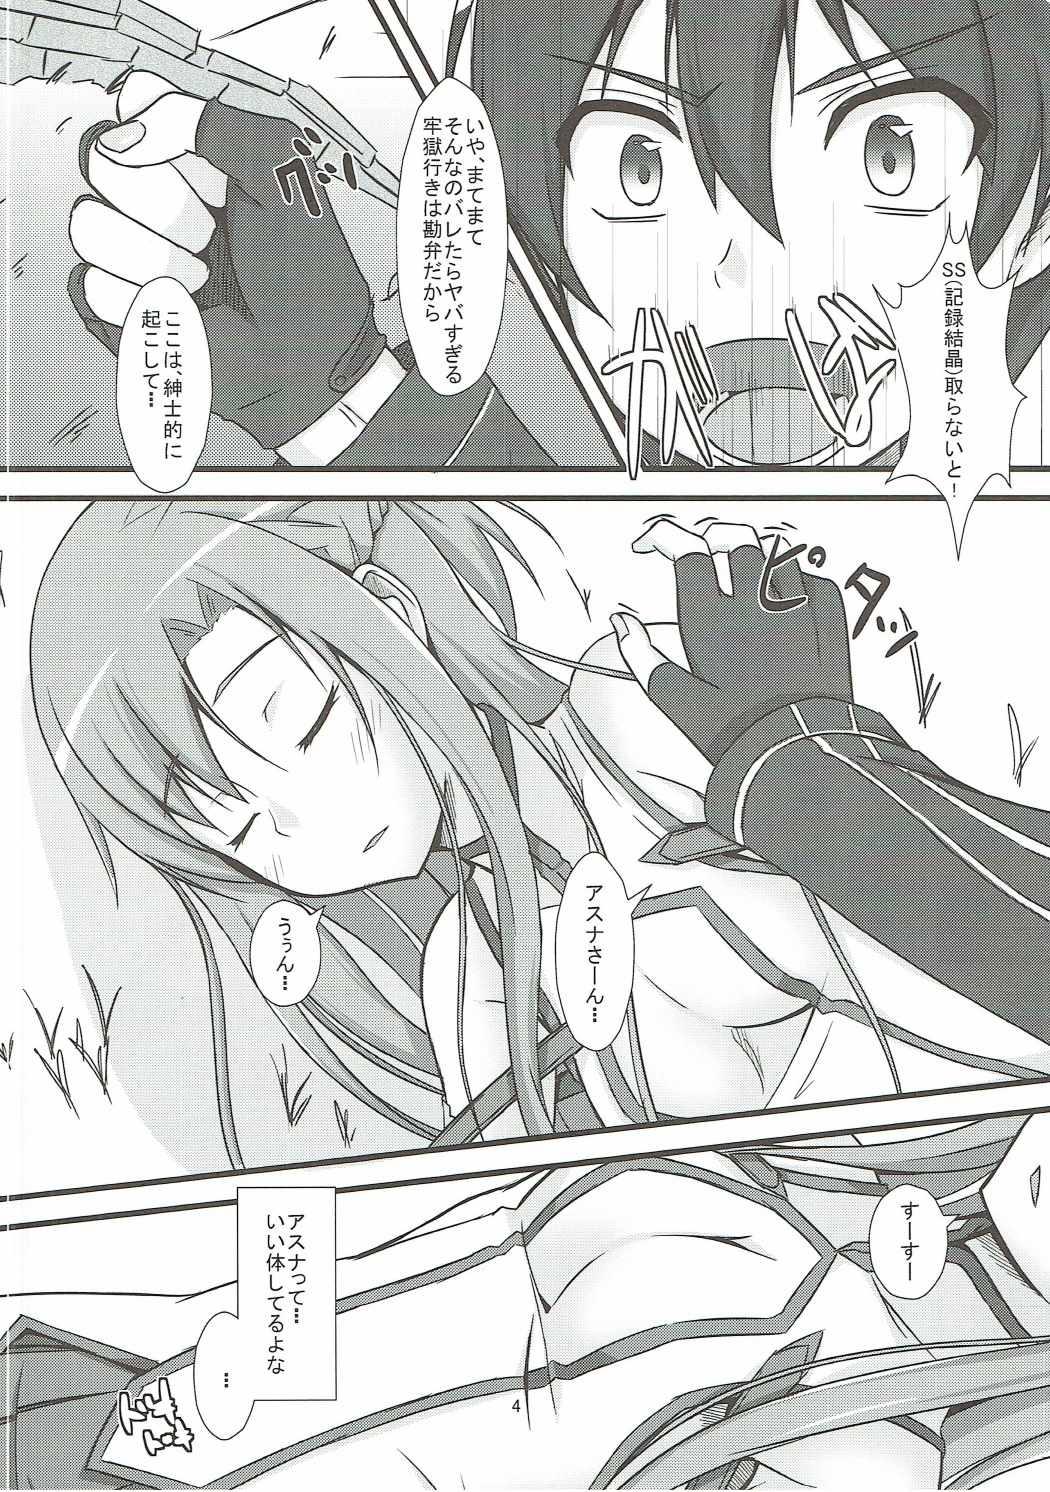 Cbt Asuna Strategy Guide - Sword art online Pov Blowjob - Page 3